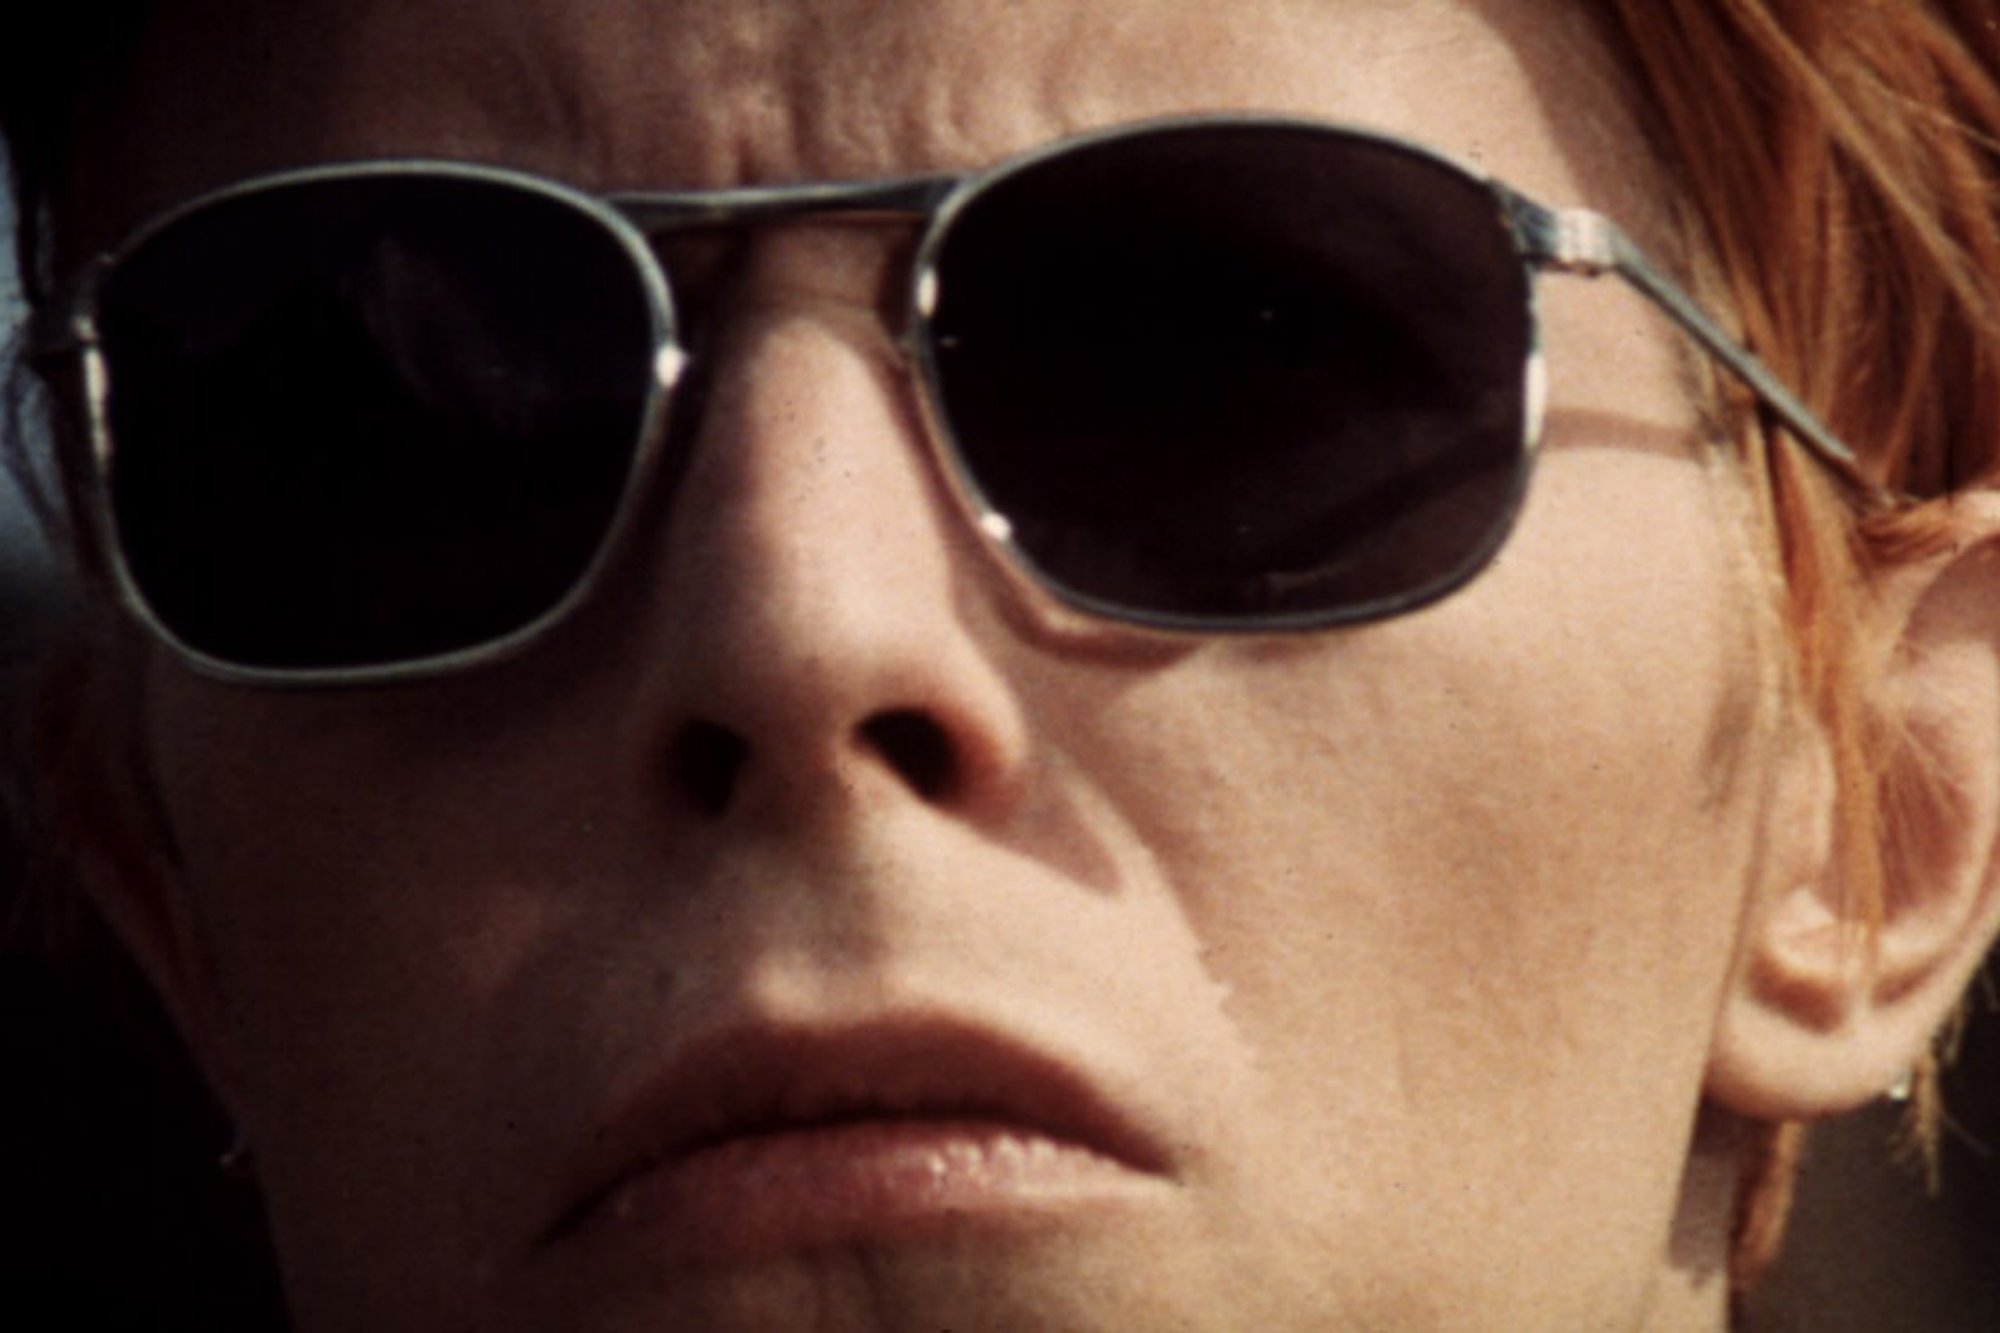 Bowie the man who fell to earth